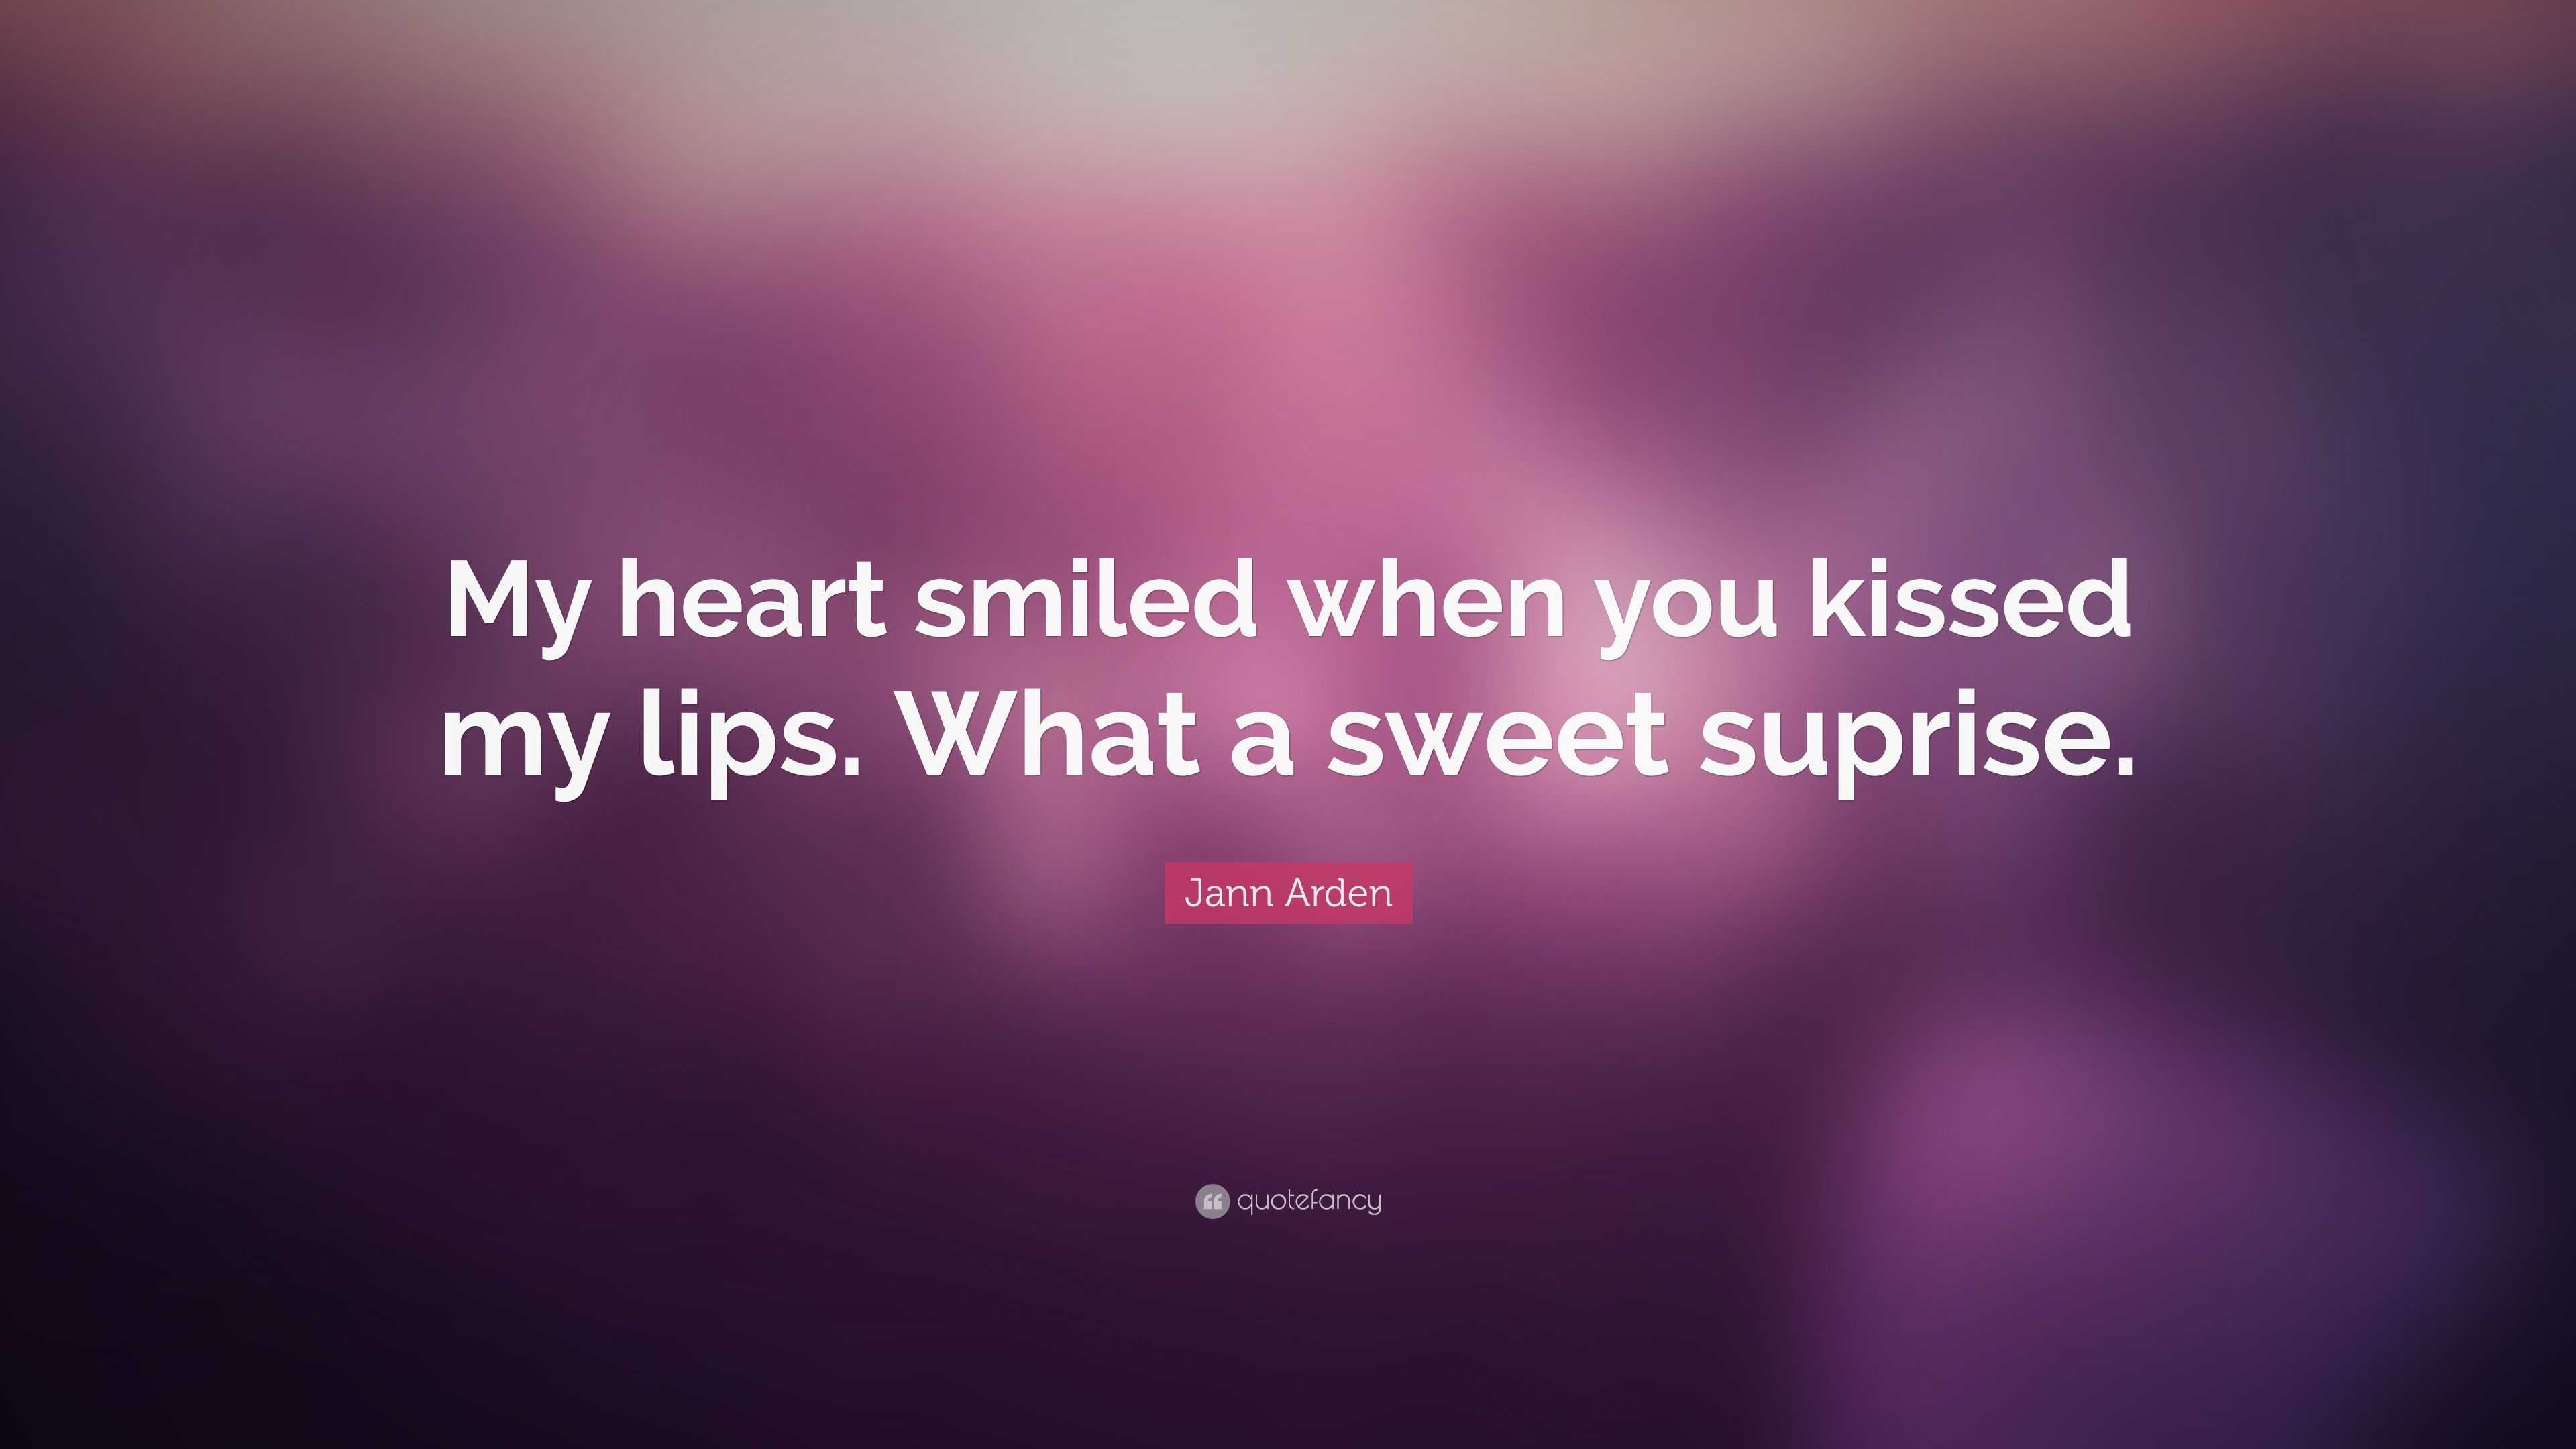 Jann Arden Quote “my Heart Smiled When You Kissed My Lips What A